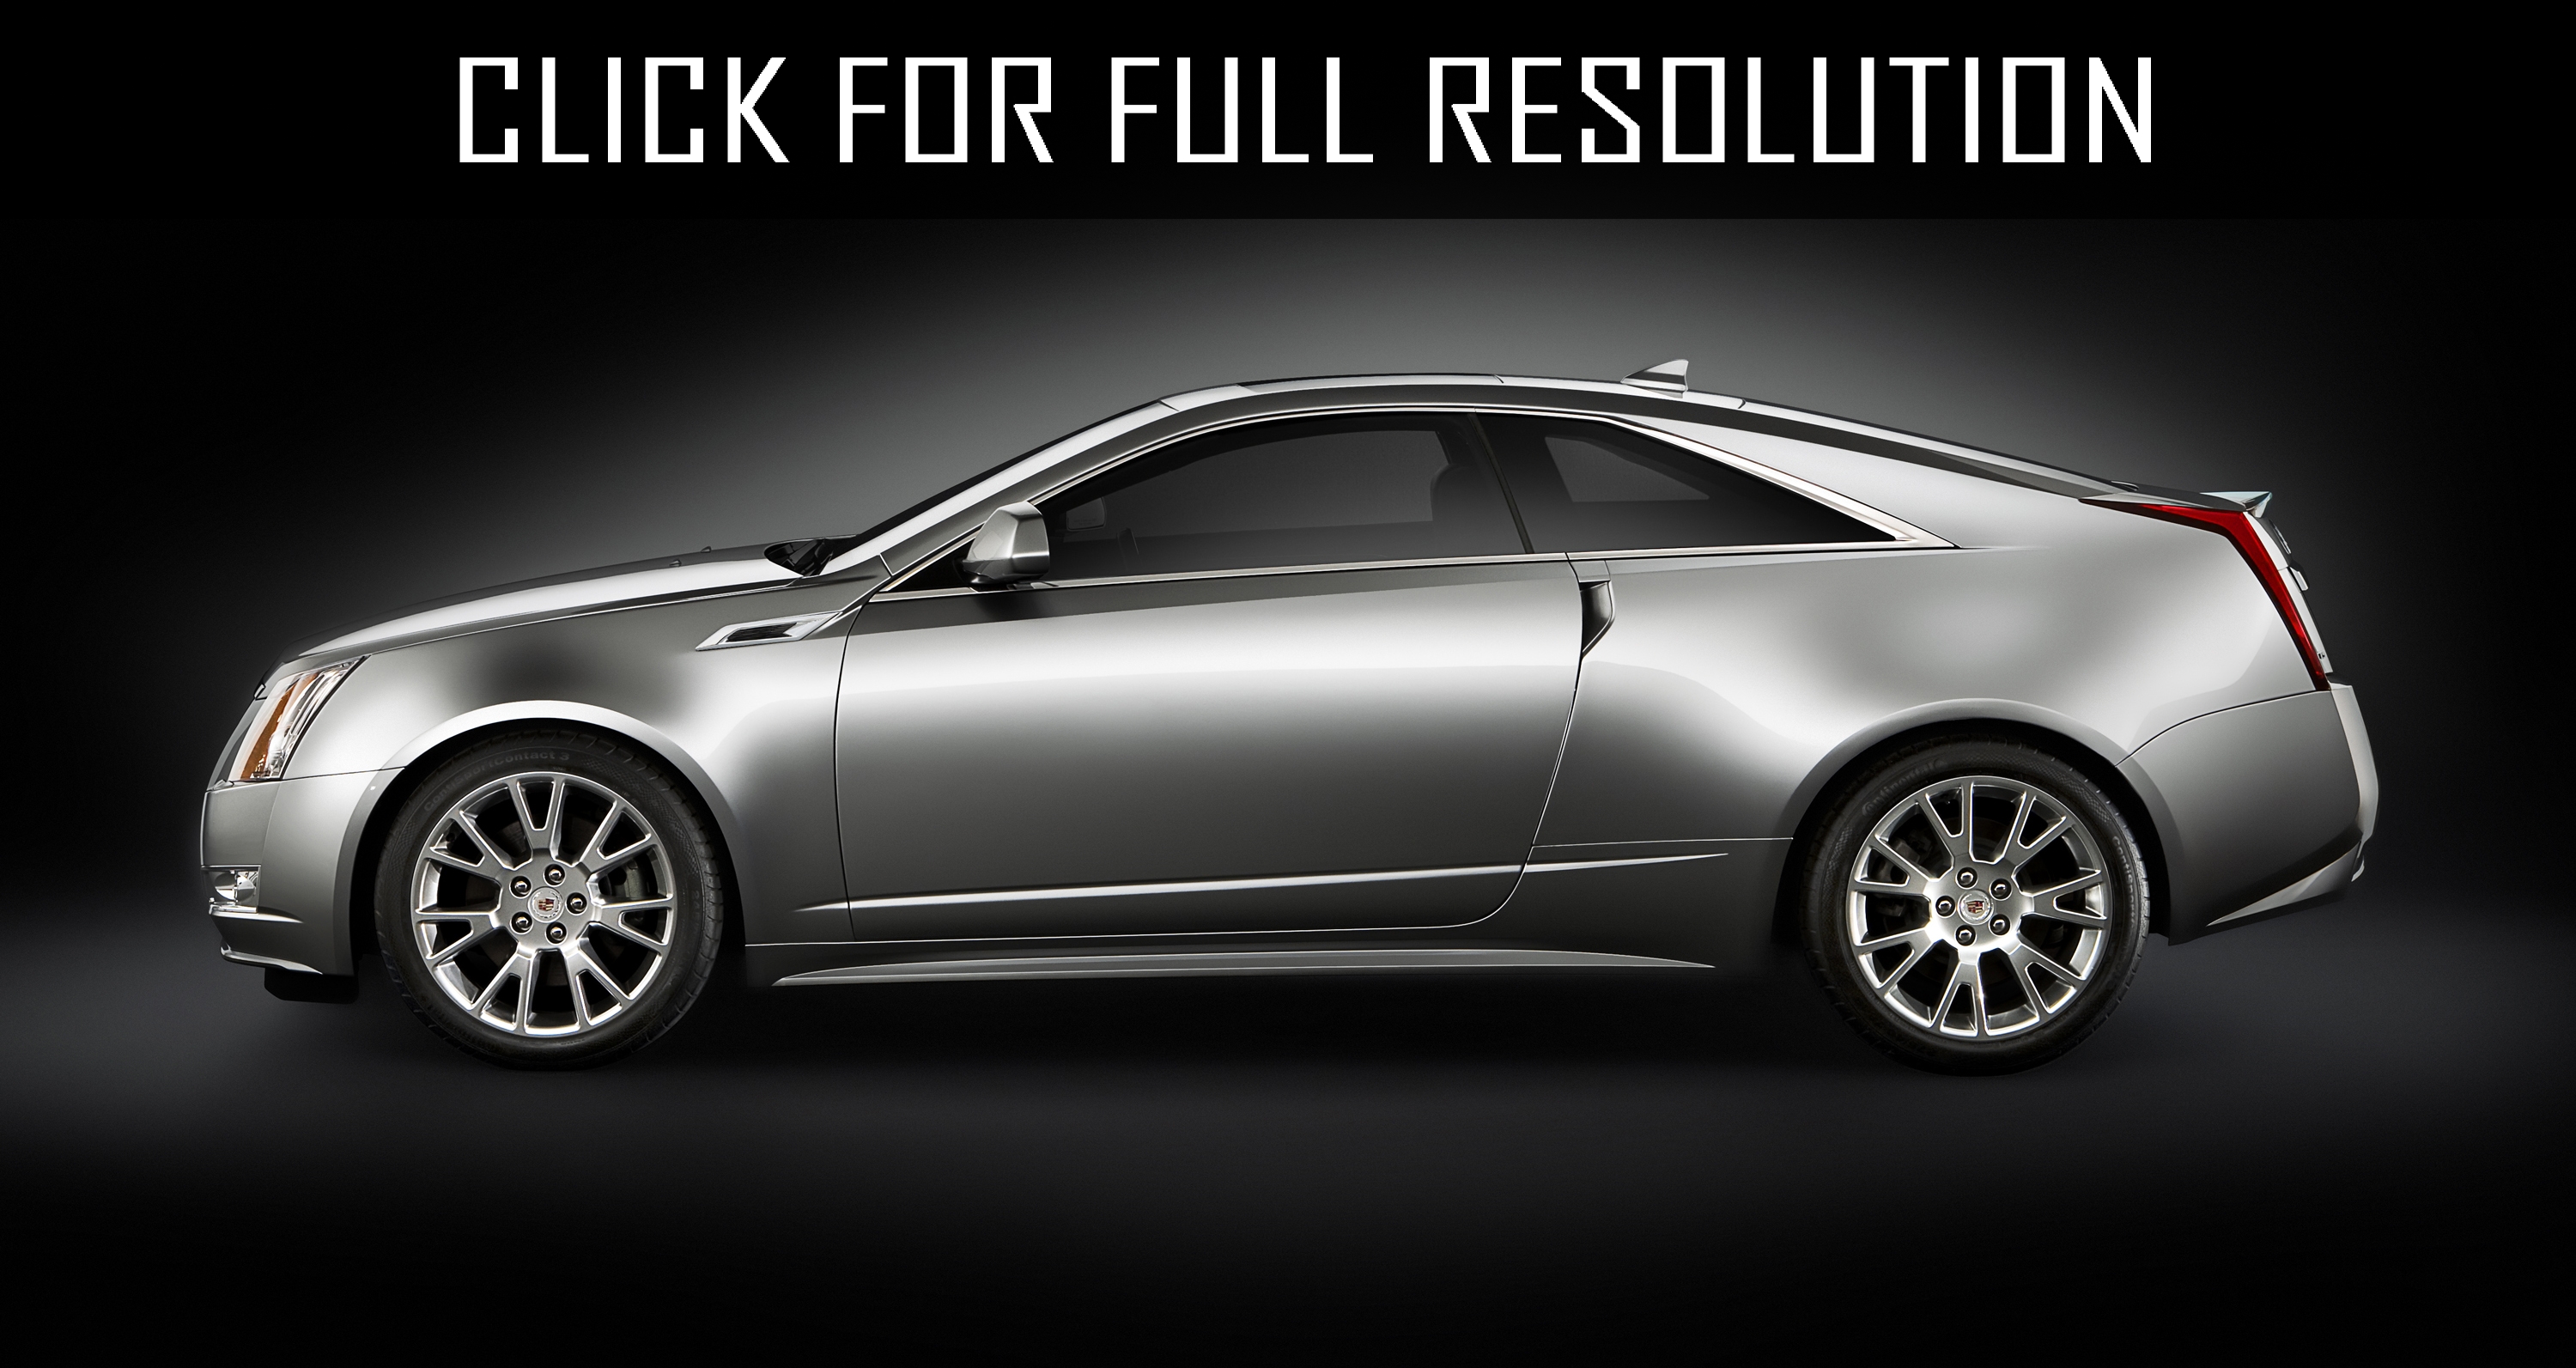 2011 Cadillac Cts Coupe